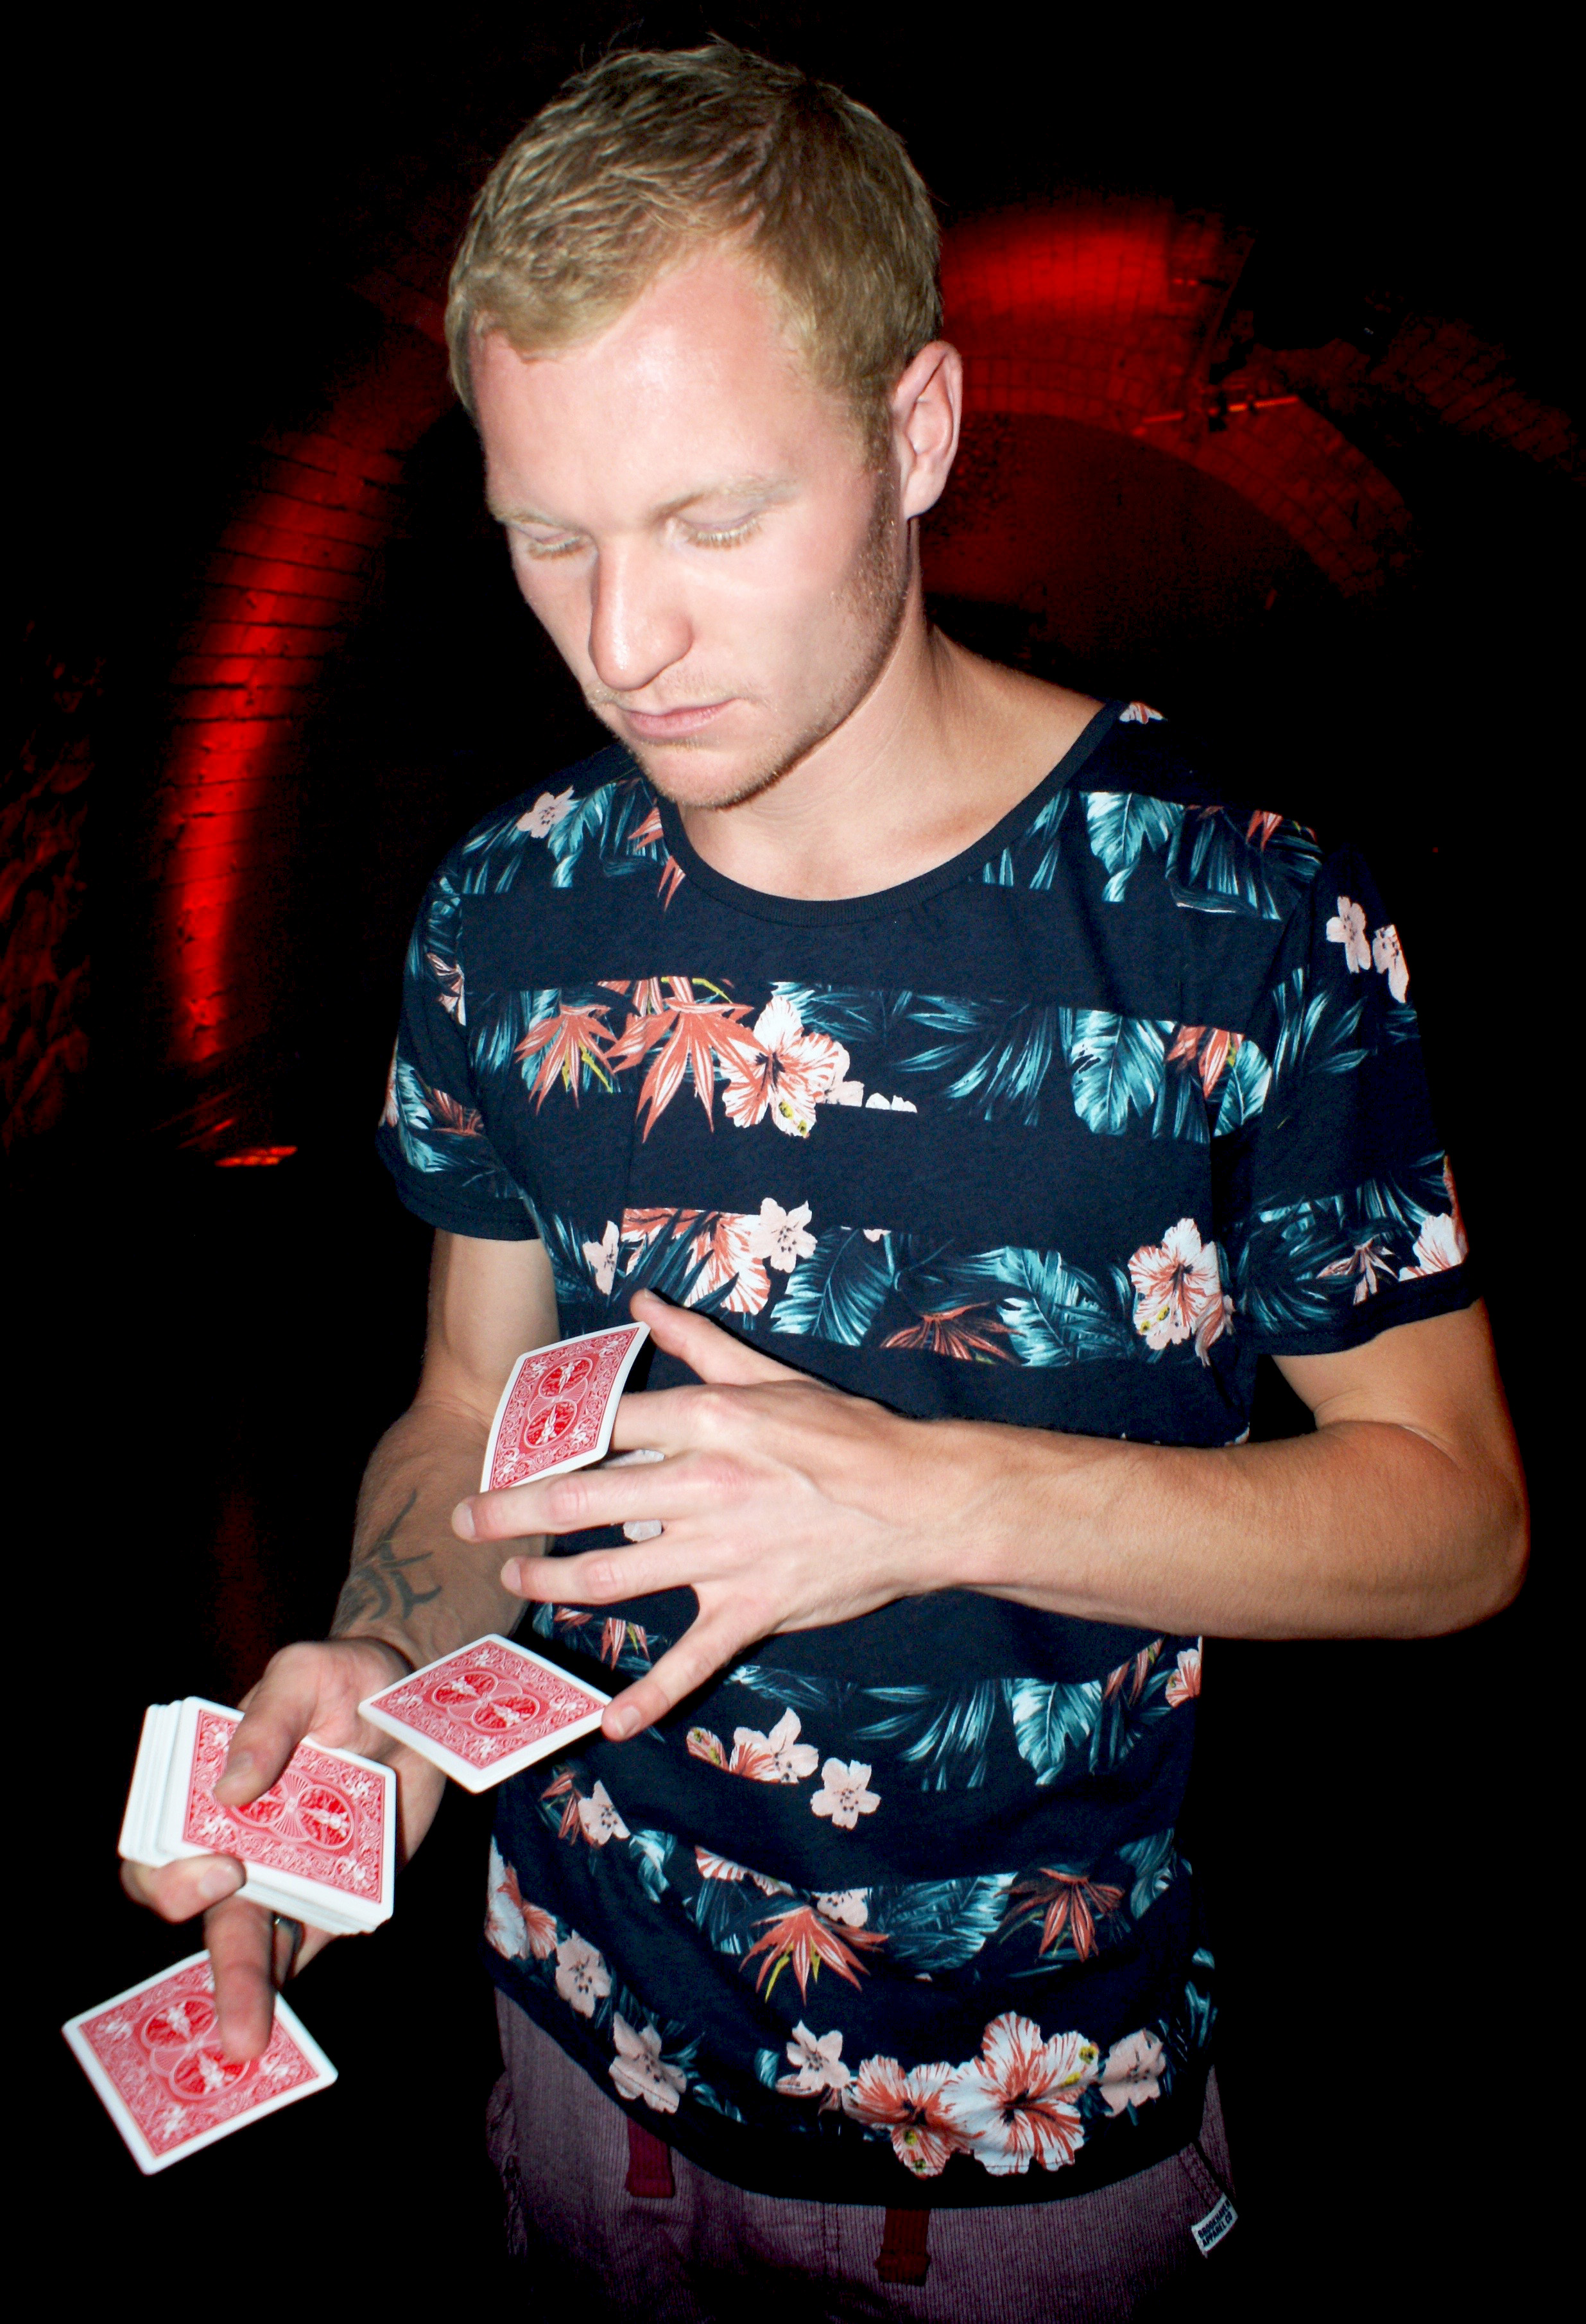 Street Magician Liam Walsh performing close up magic for Virgin Media Party in London